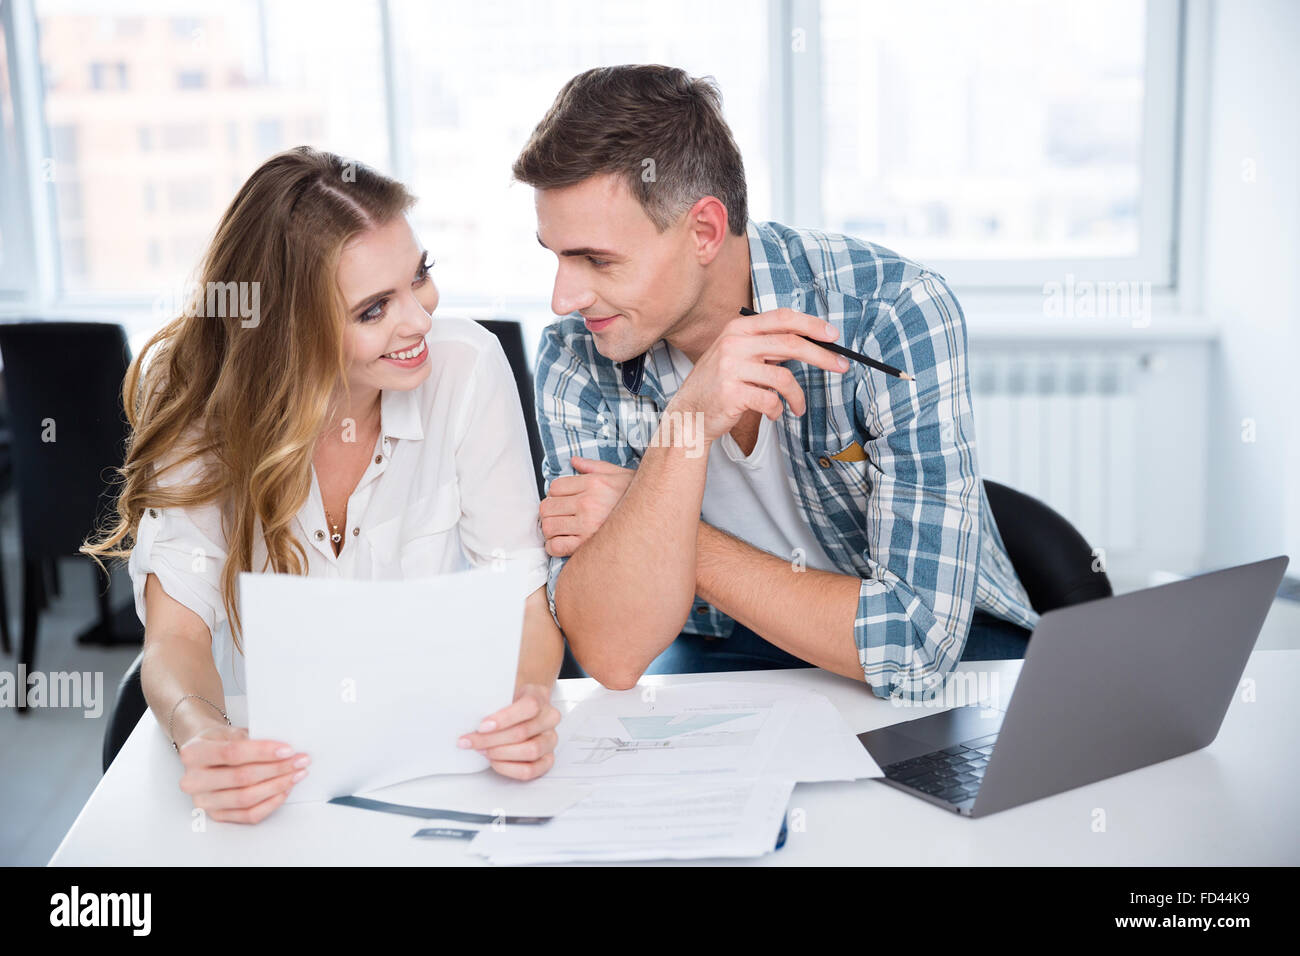 Cheerful man and woman working and flirting on business meeting Stock Photo